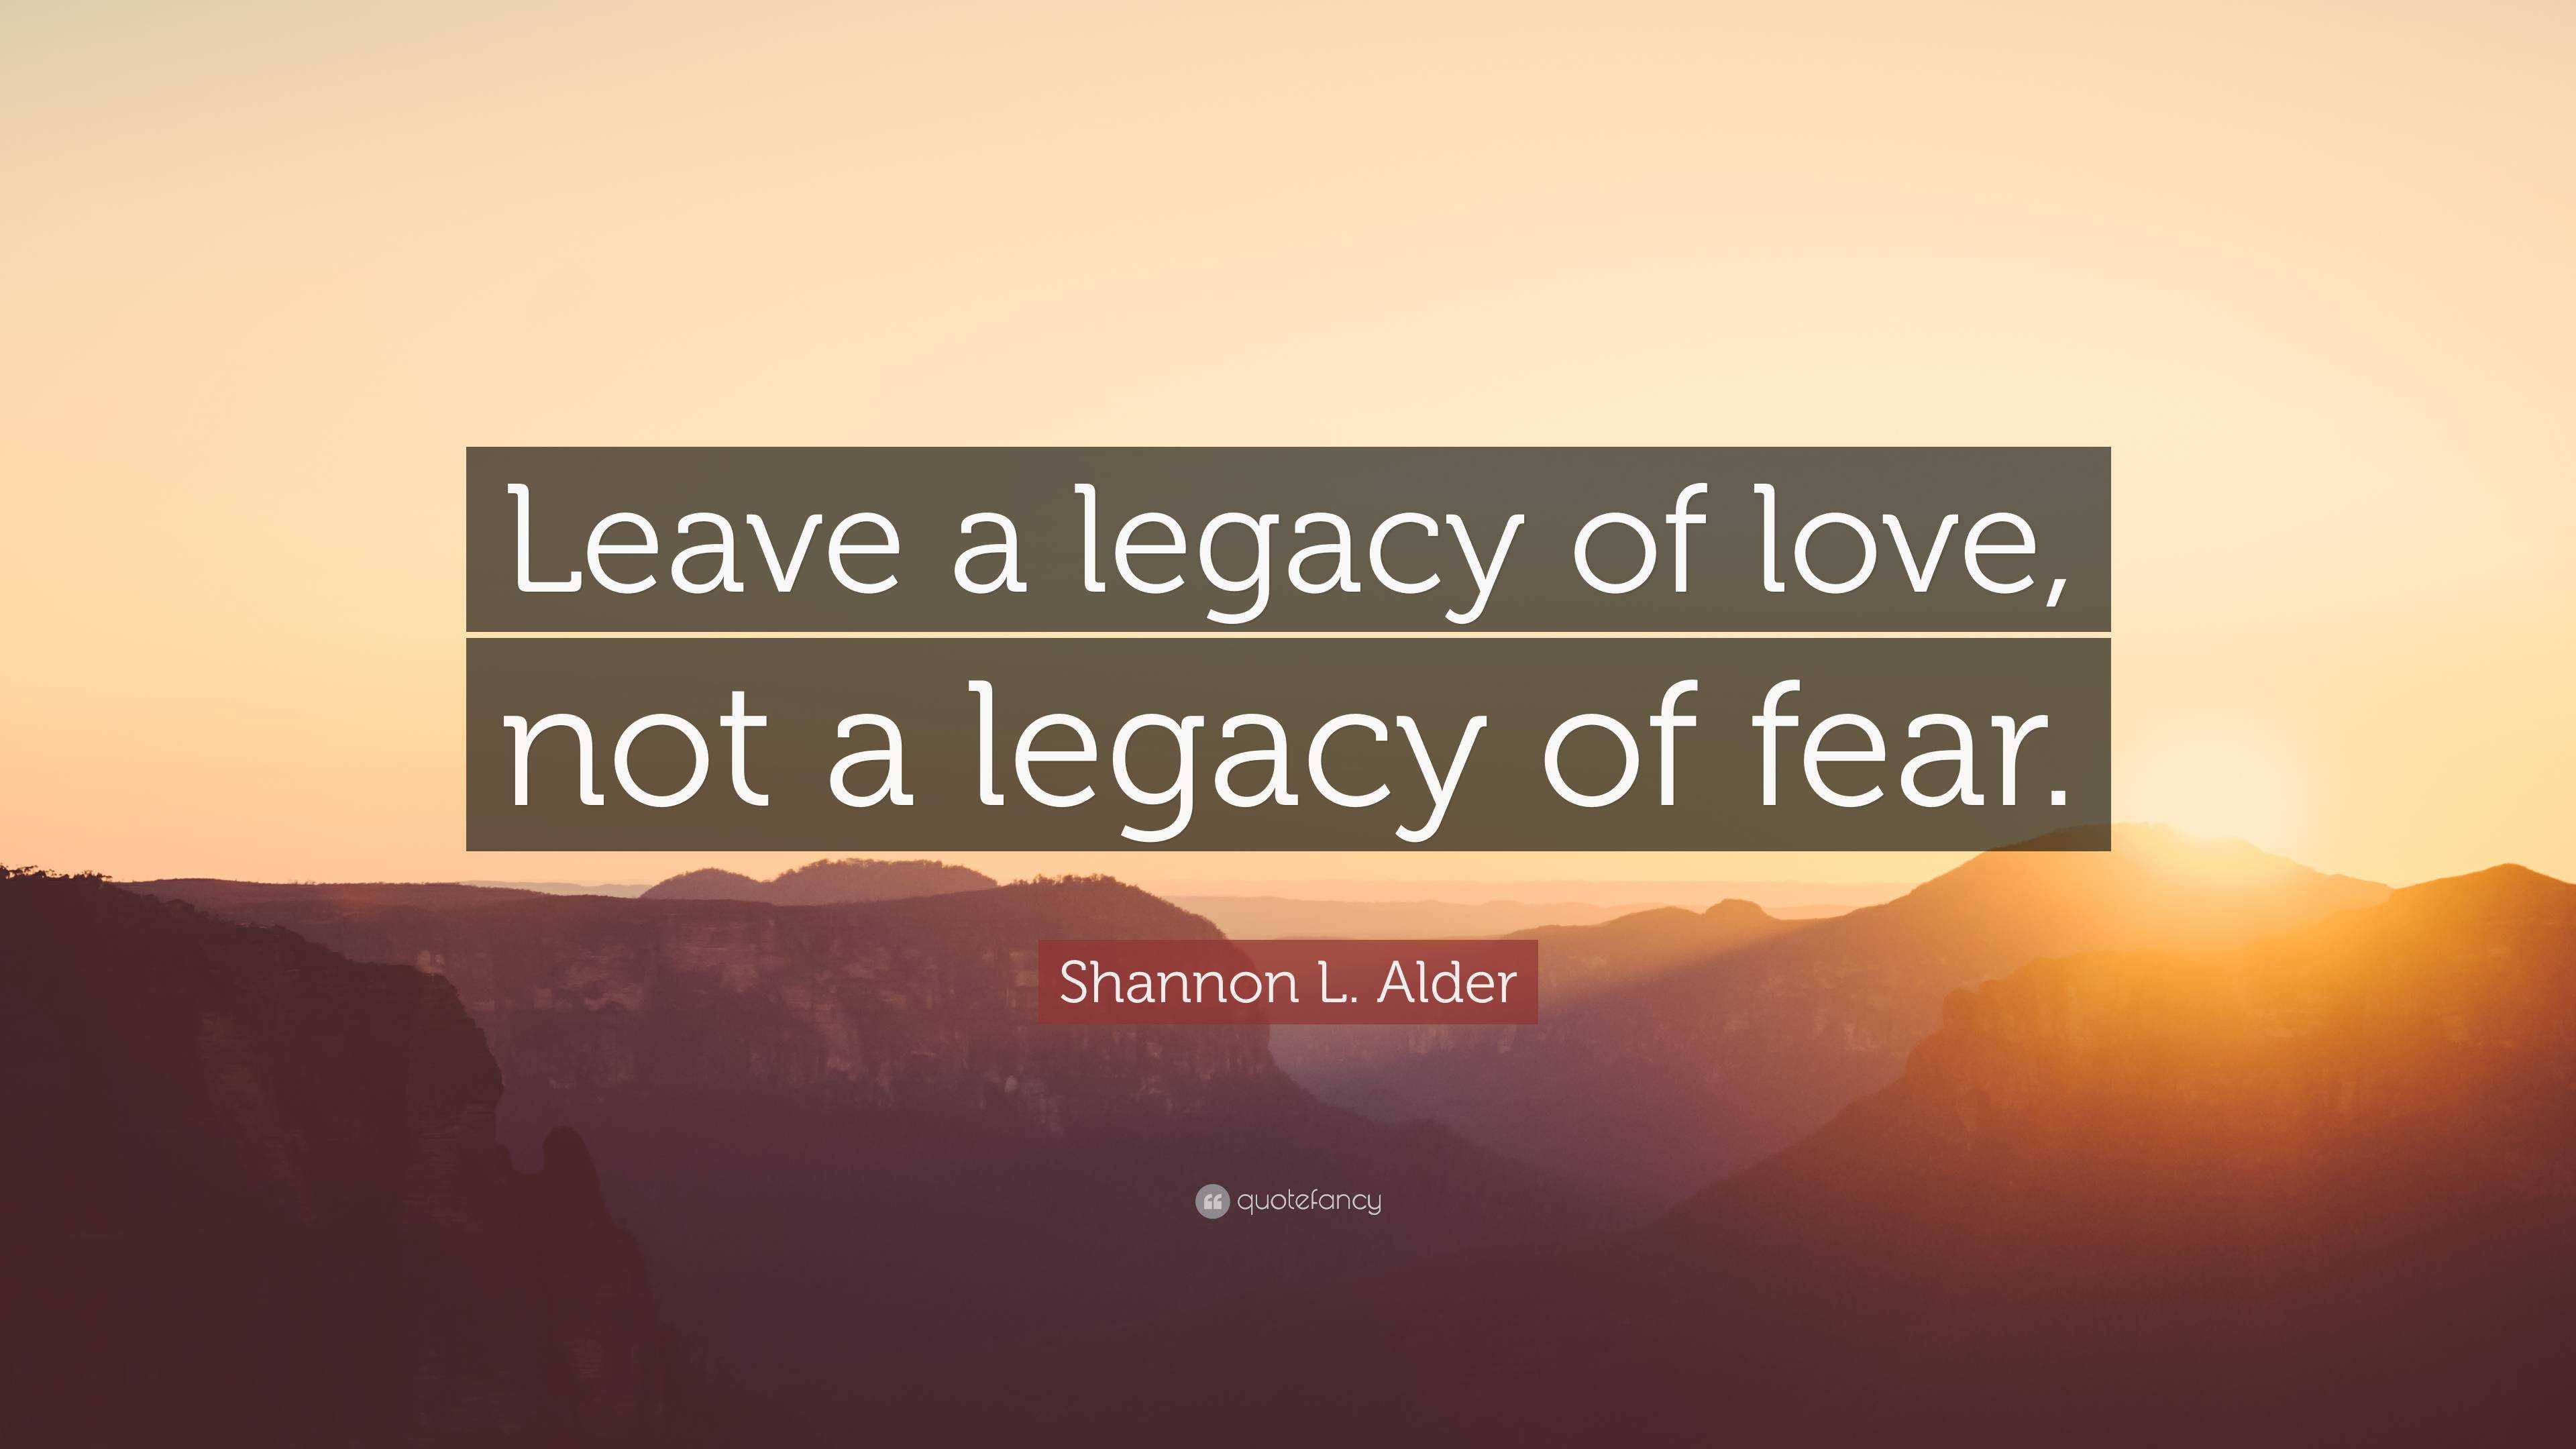 https://quotefancy.com/media/wallpaper/3840x2160/6839087-Shannon-L-Alder-Quote-Leave-a-legacy-of-love-not-a-legacy-of-fear.jpg